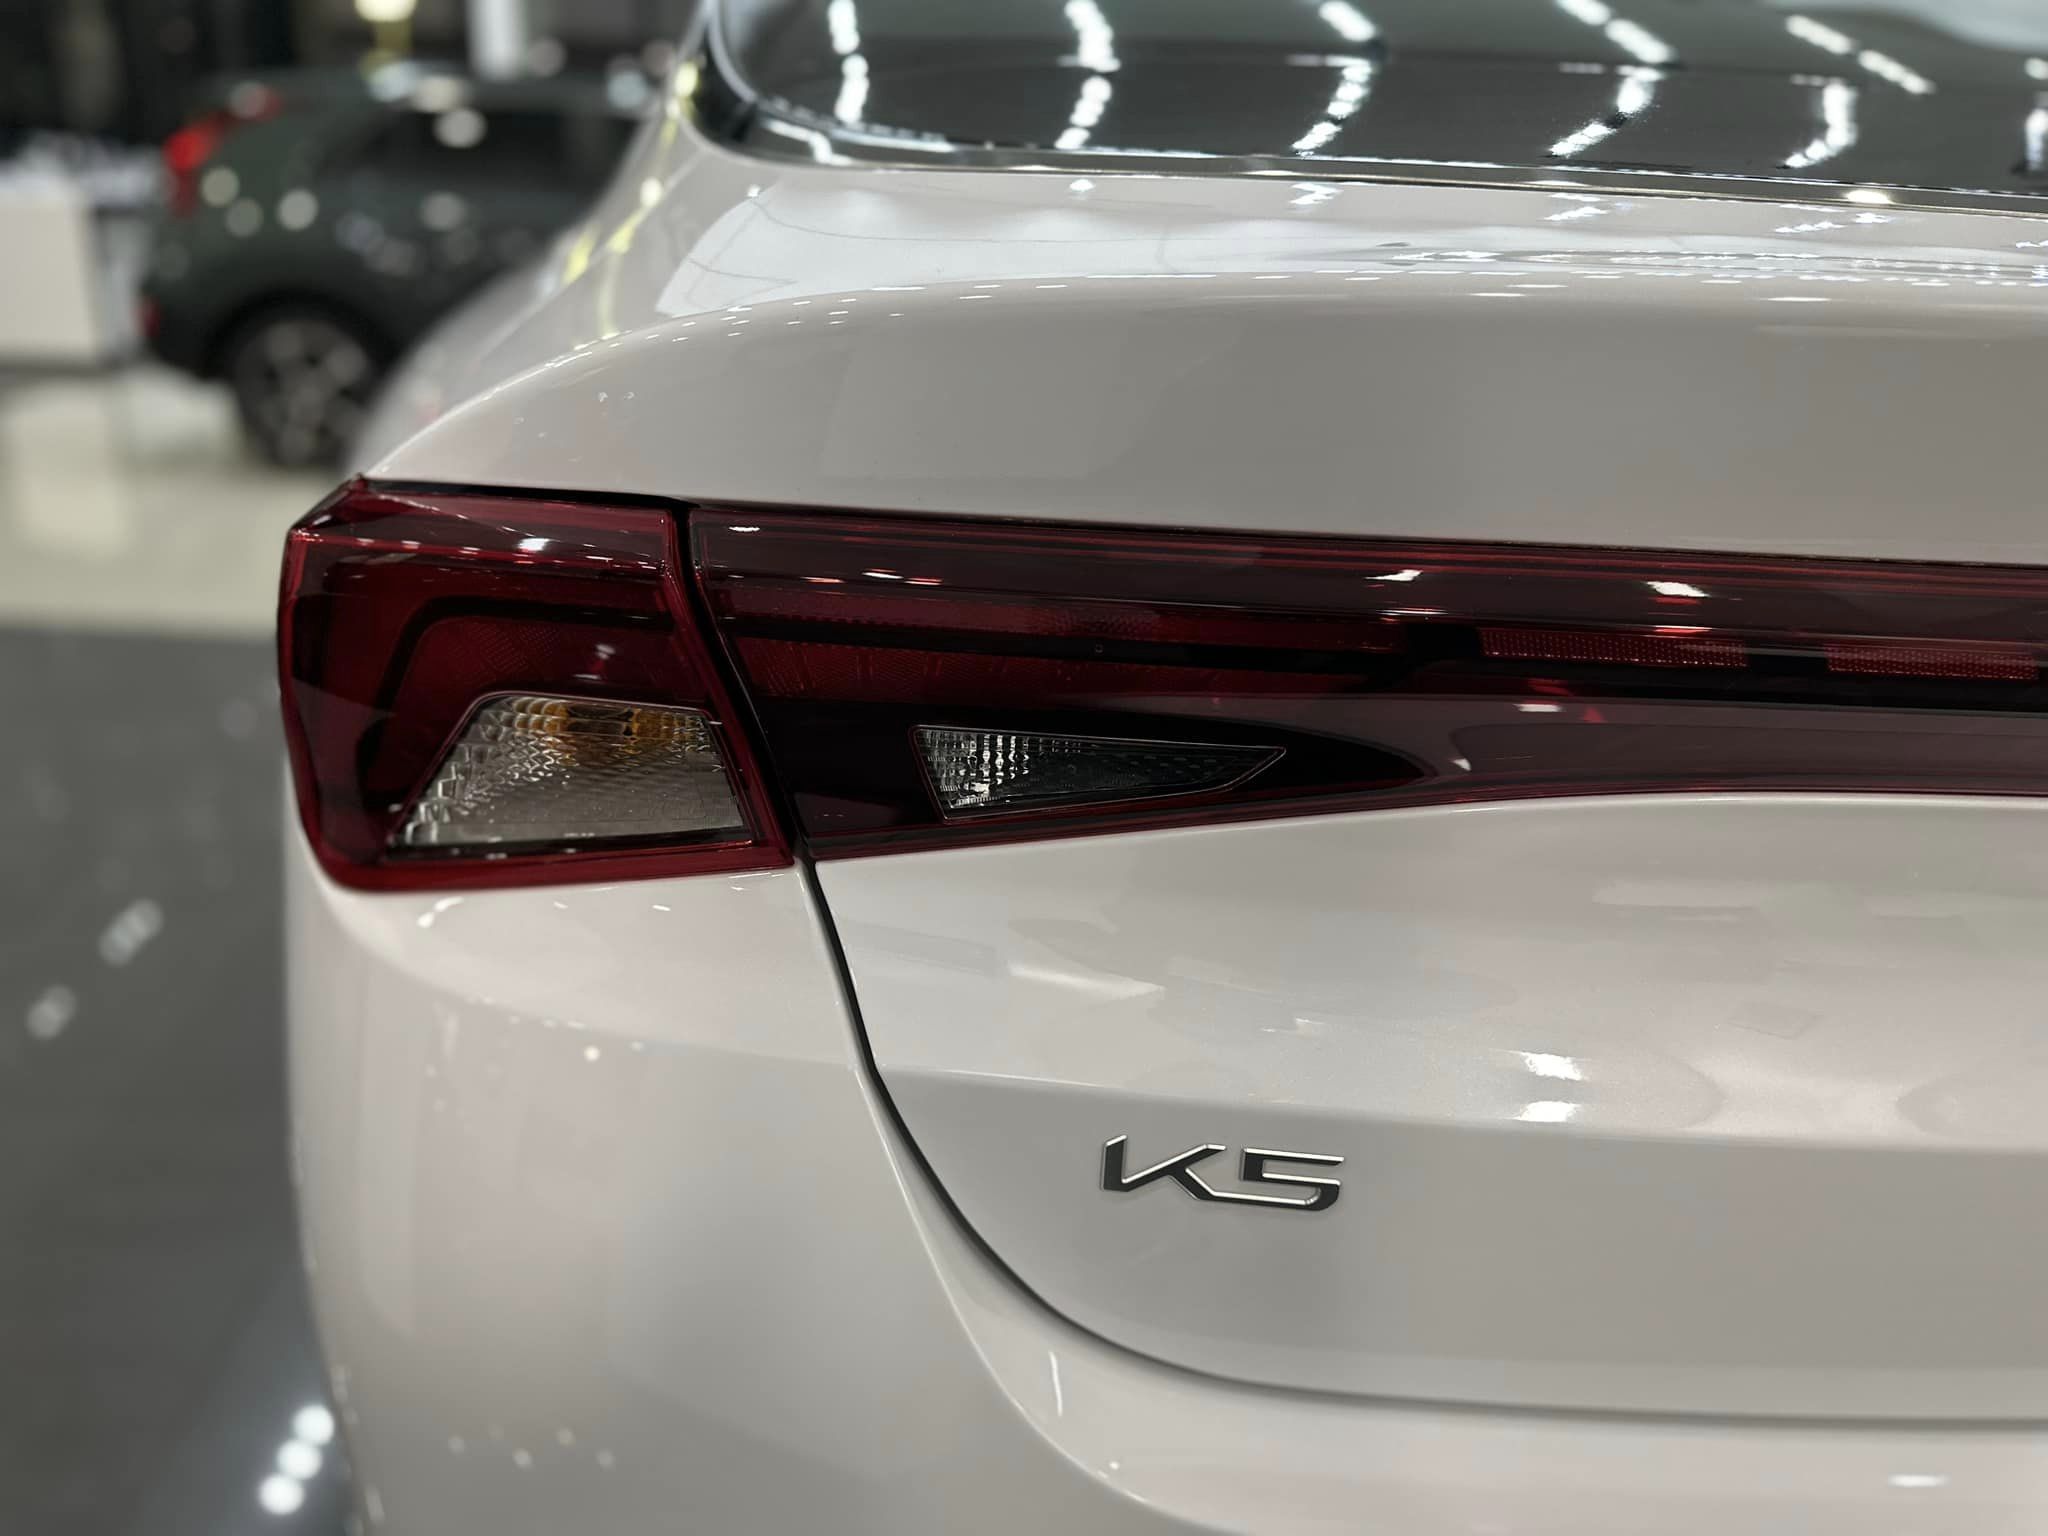 2023 Kia K5 - Glacial White Pearl - Rear Taillights Driver's Side